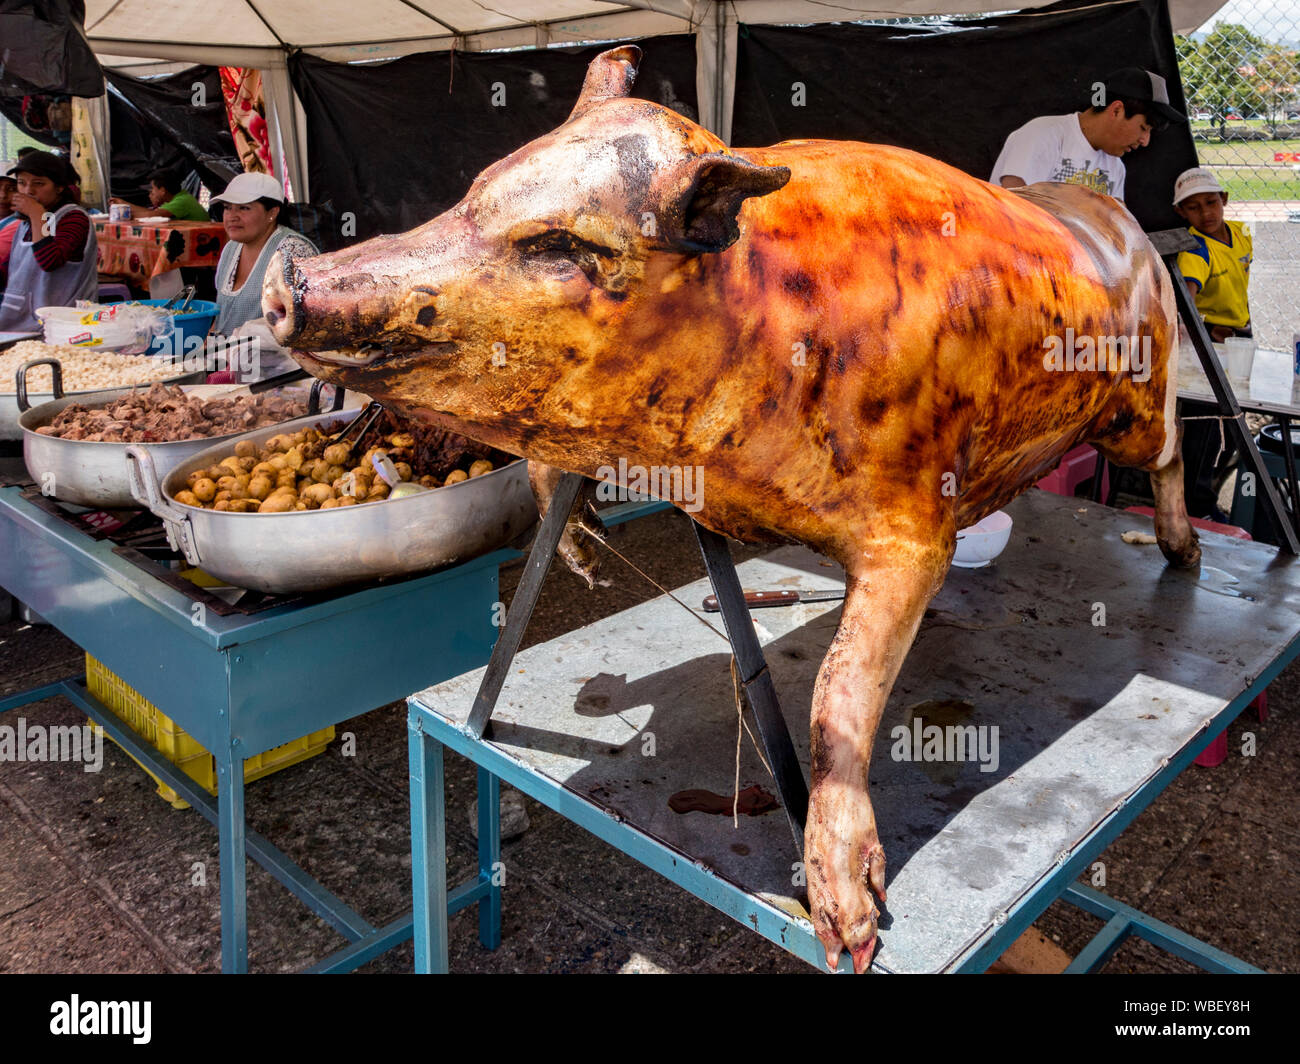 Cuenca, Ecuador - November 2, 2017 - Roast pig and other foods are on display for lunch at a festival in the park Stock Photo